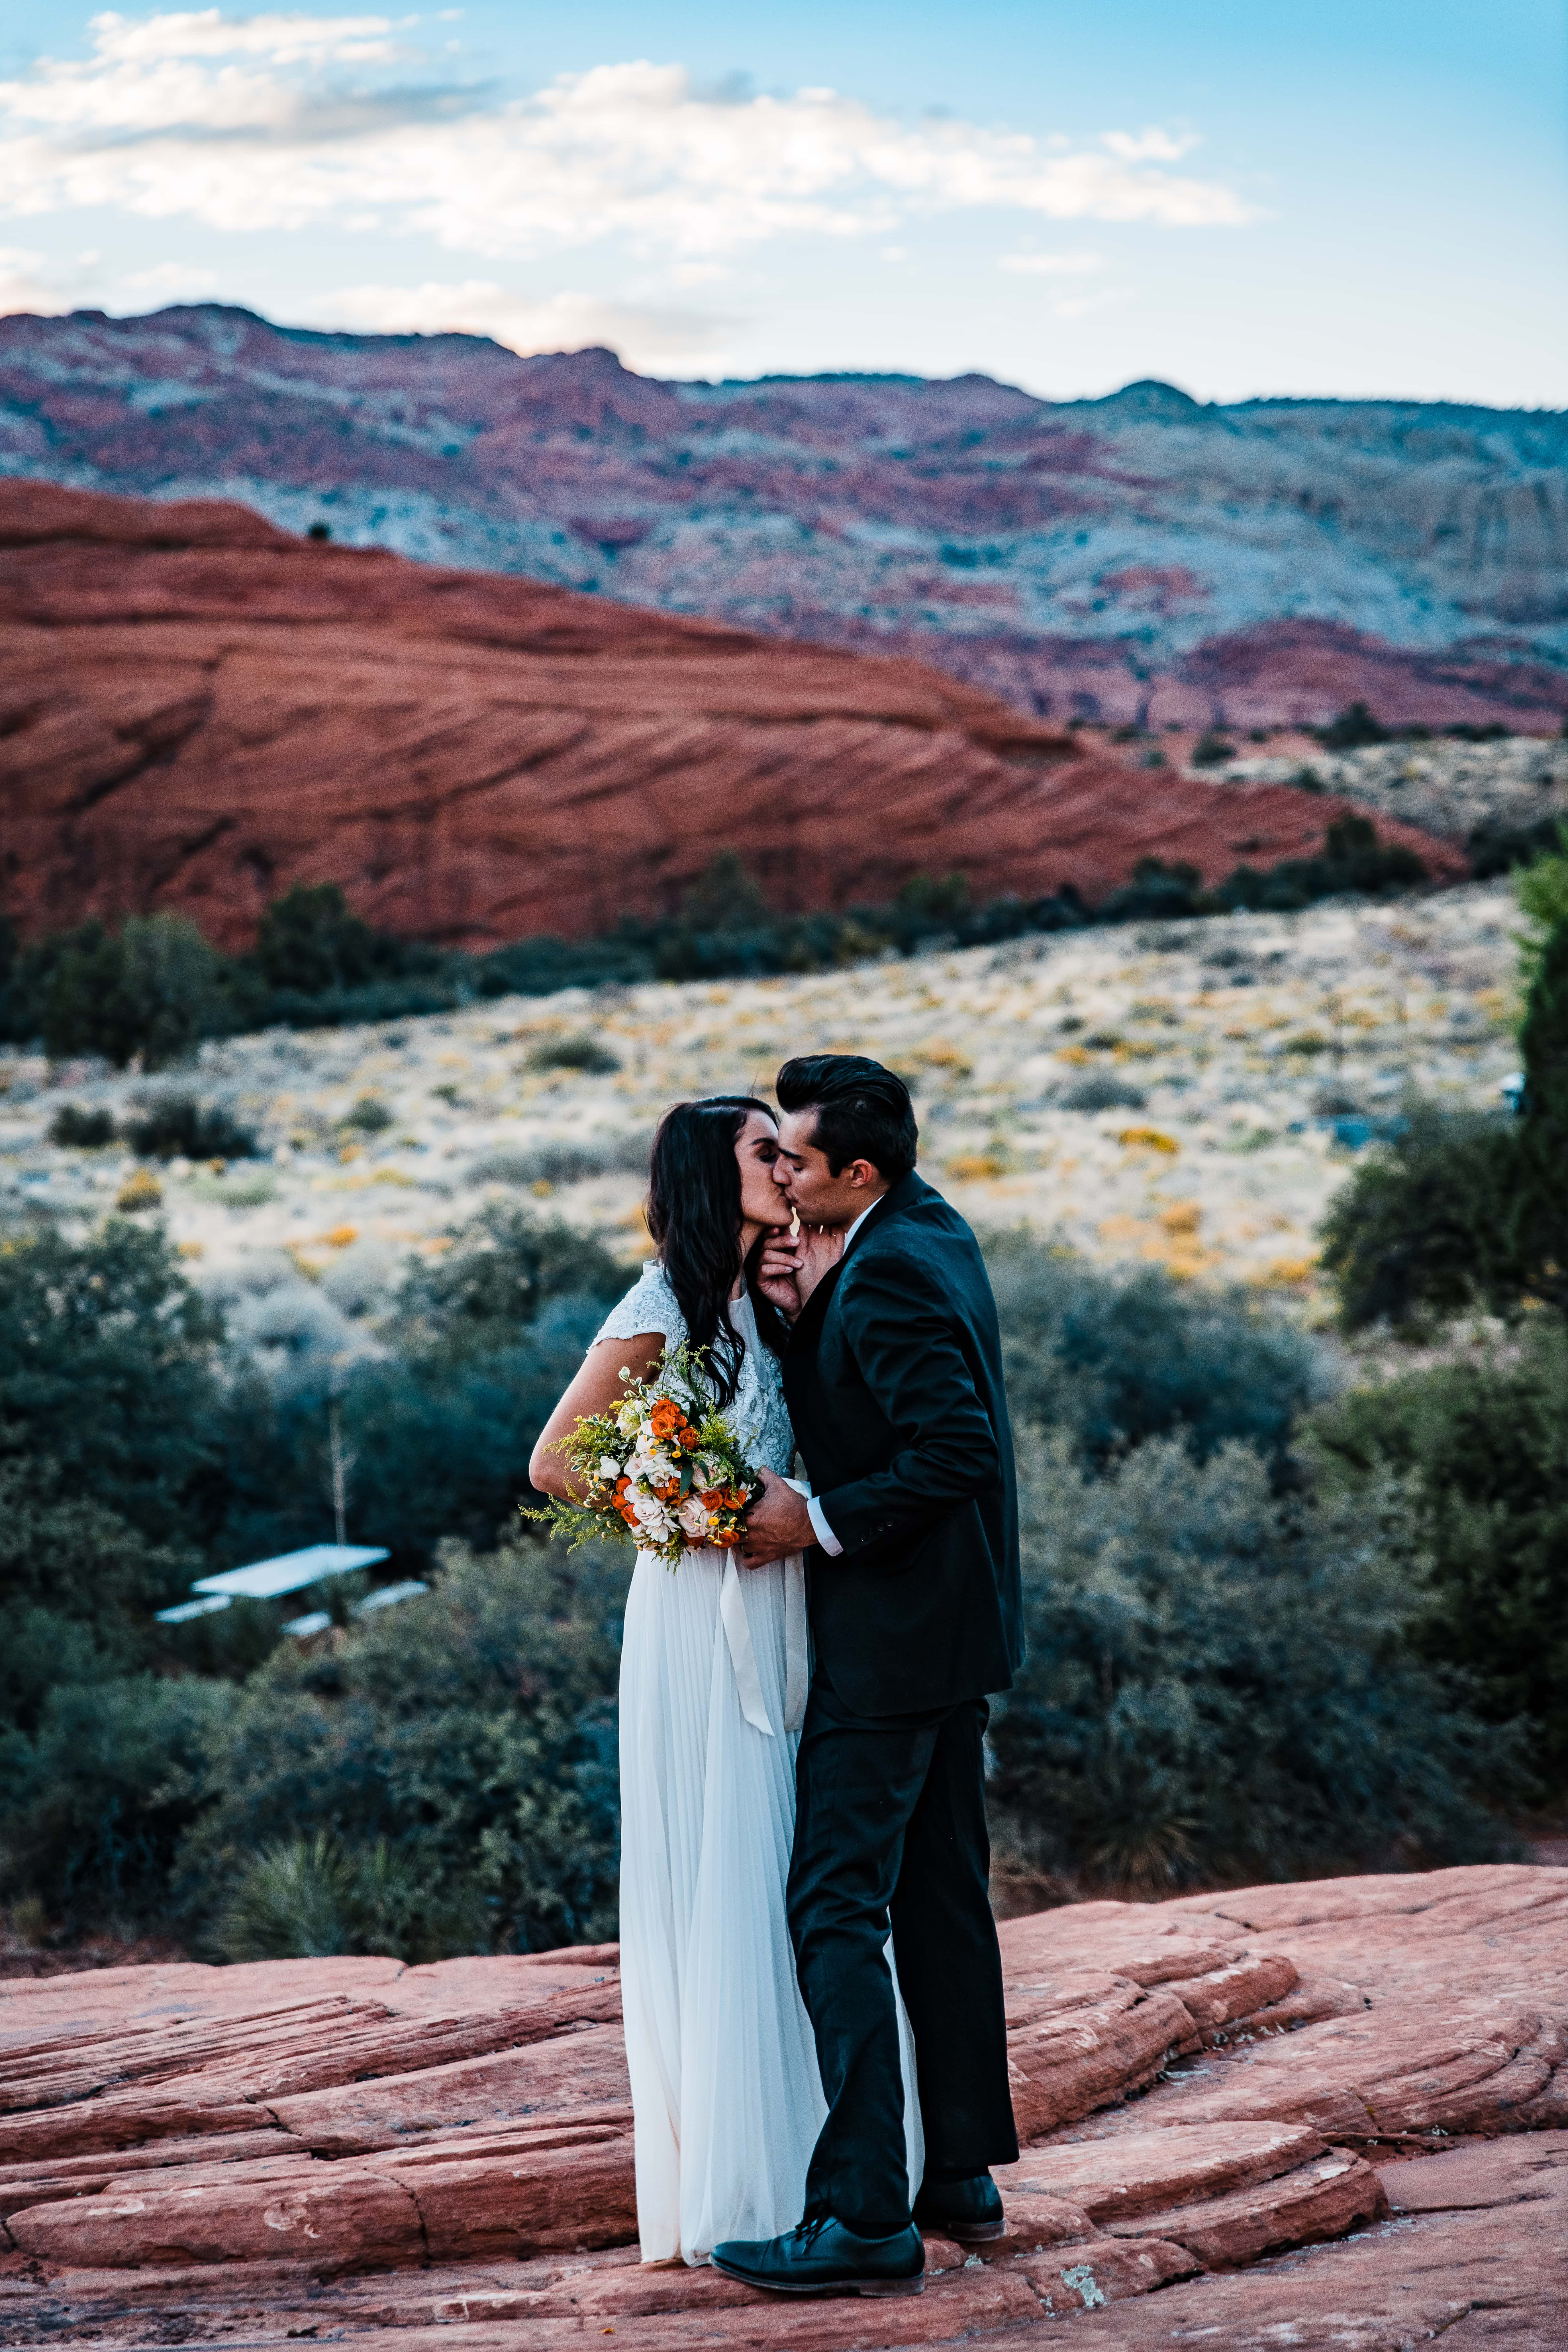 A couple kisses for their wedding portraits in the red rocks of southern Utah, her in a white wedding dress, and him wearing a black suit.